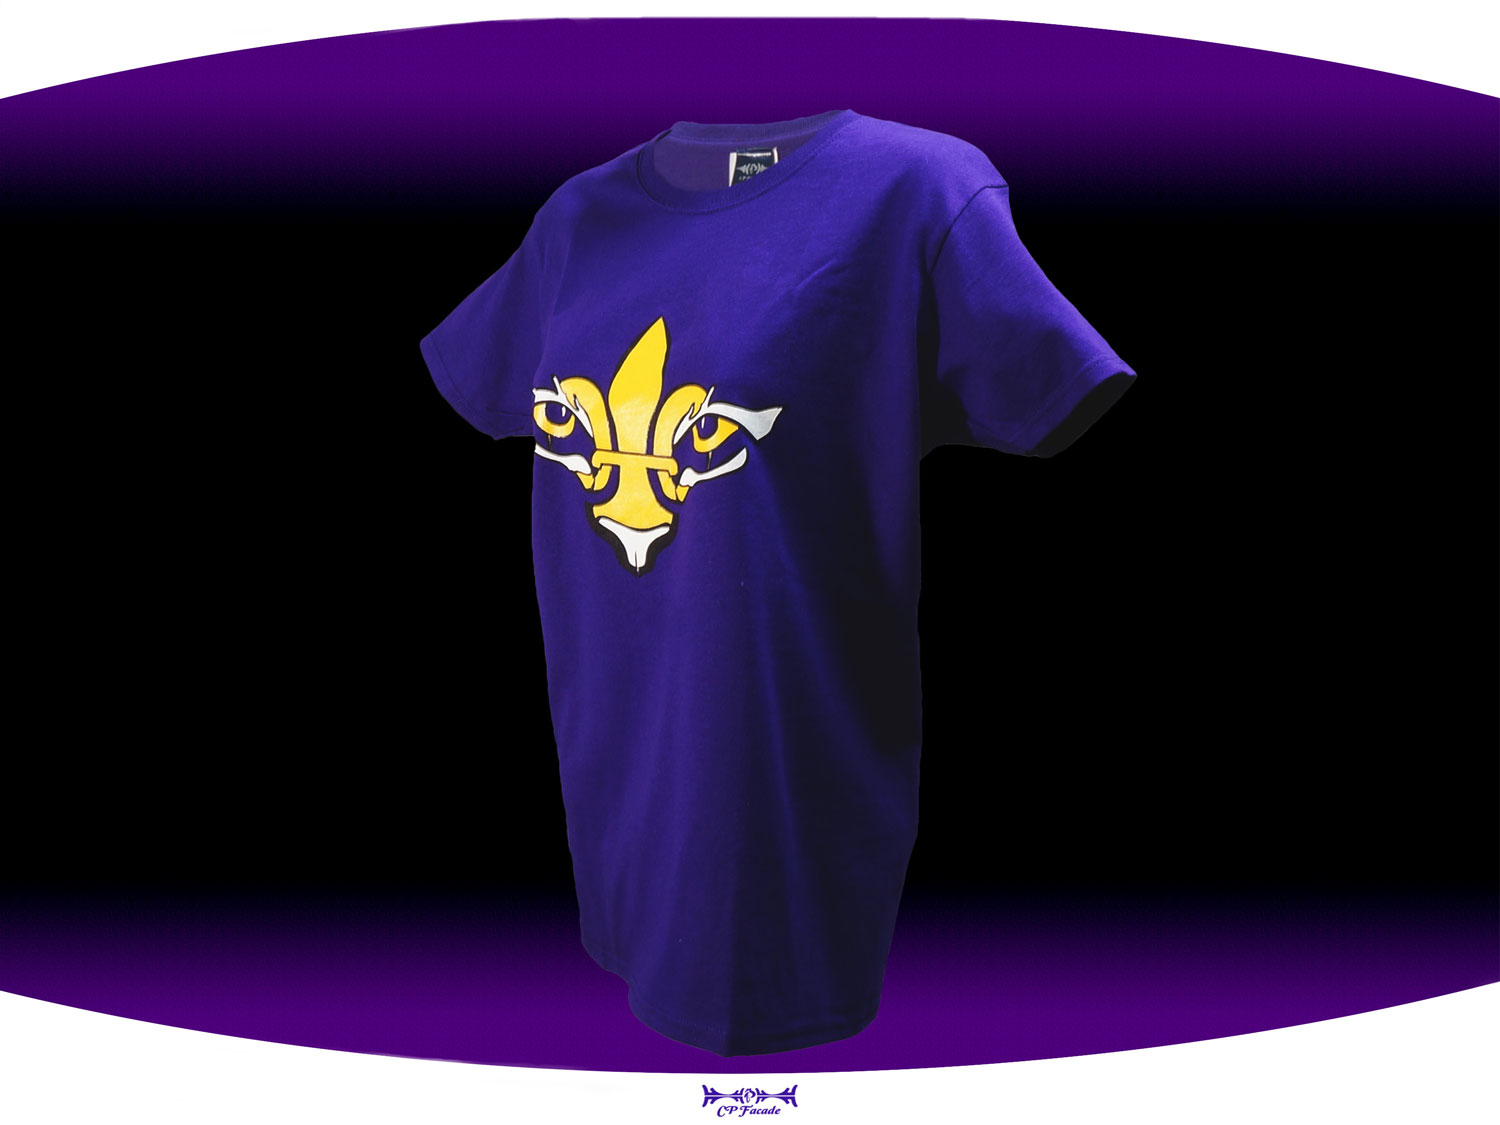 Purple screenprinted  LSU female fitted t-shirt with a gold and white fleur de lis with tiger eyes on the chest